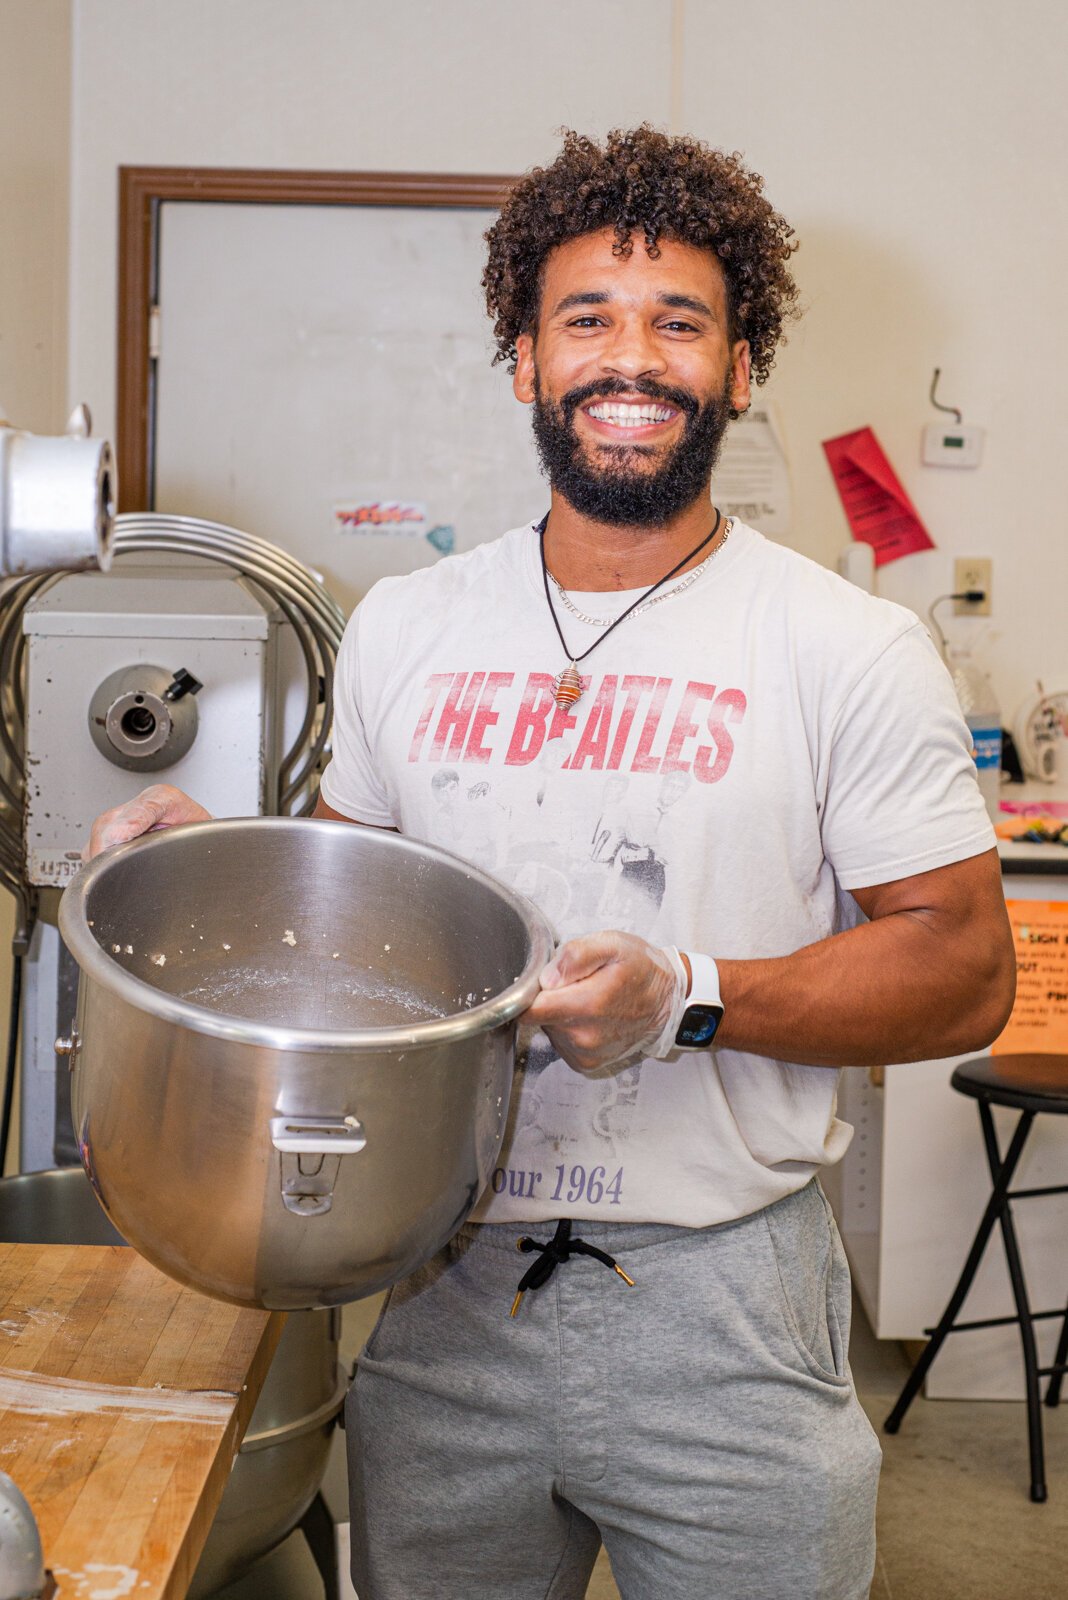 The Dirty Vegan is owned by Derick Waters. He chose the name for the company to show vegan food did not have to be boring. 